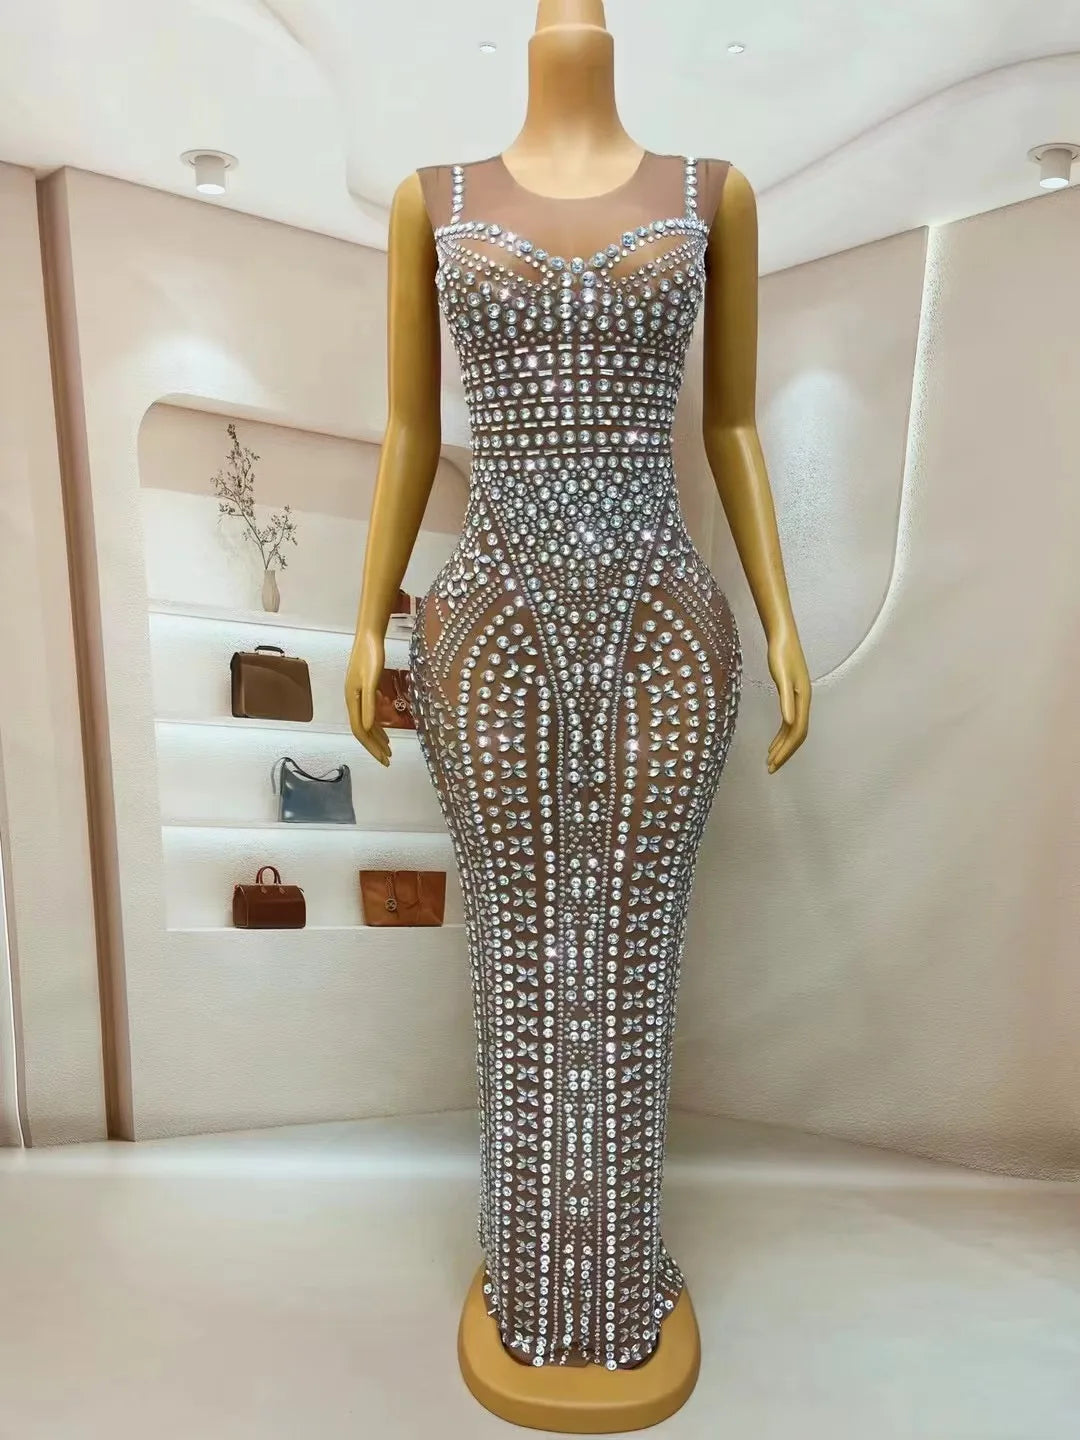 Silver Rhinestones Brown Transparent Dress Birthday Celebrate Evening Stretch Costume Sexy Dance Performance Photo Shoot Gowns